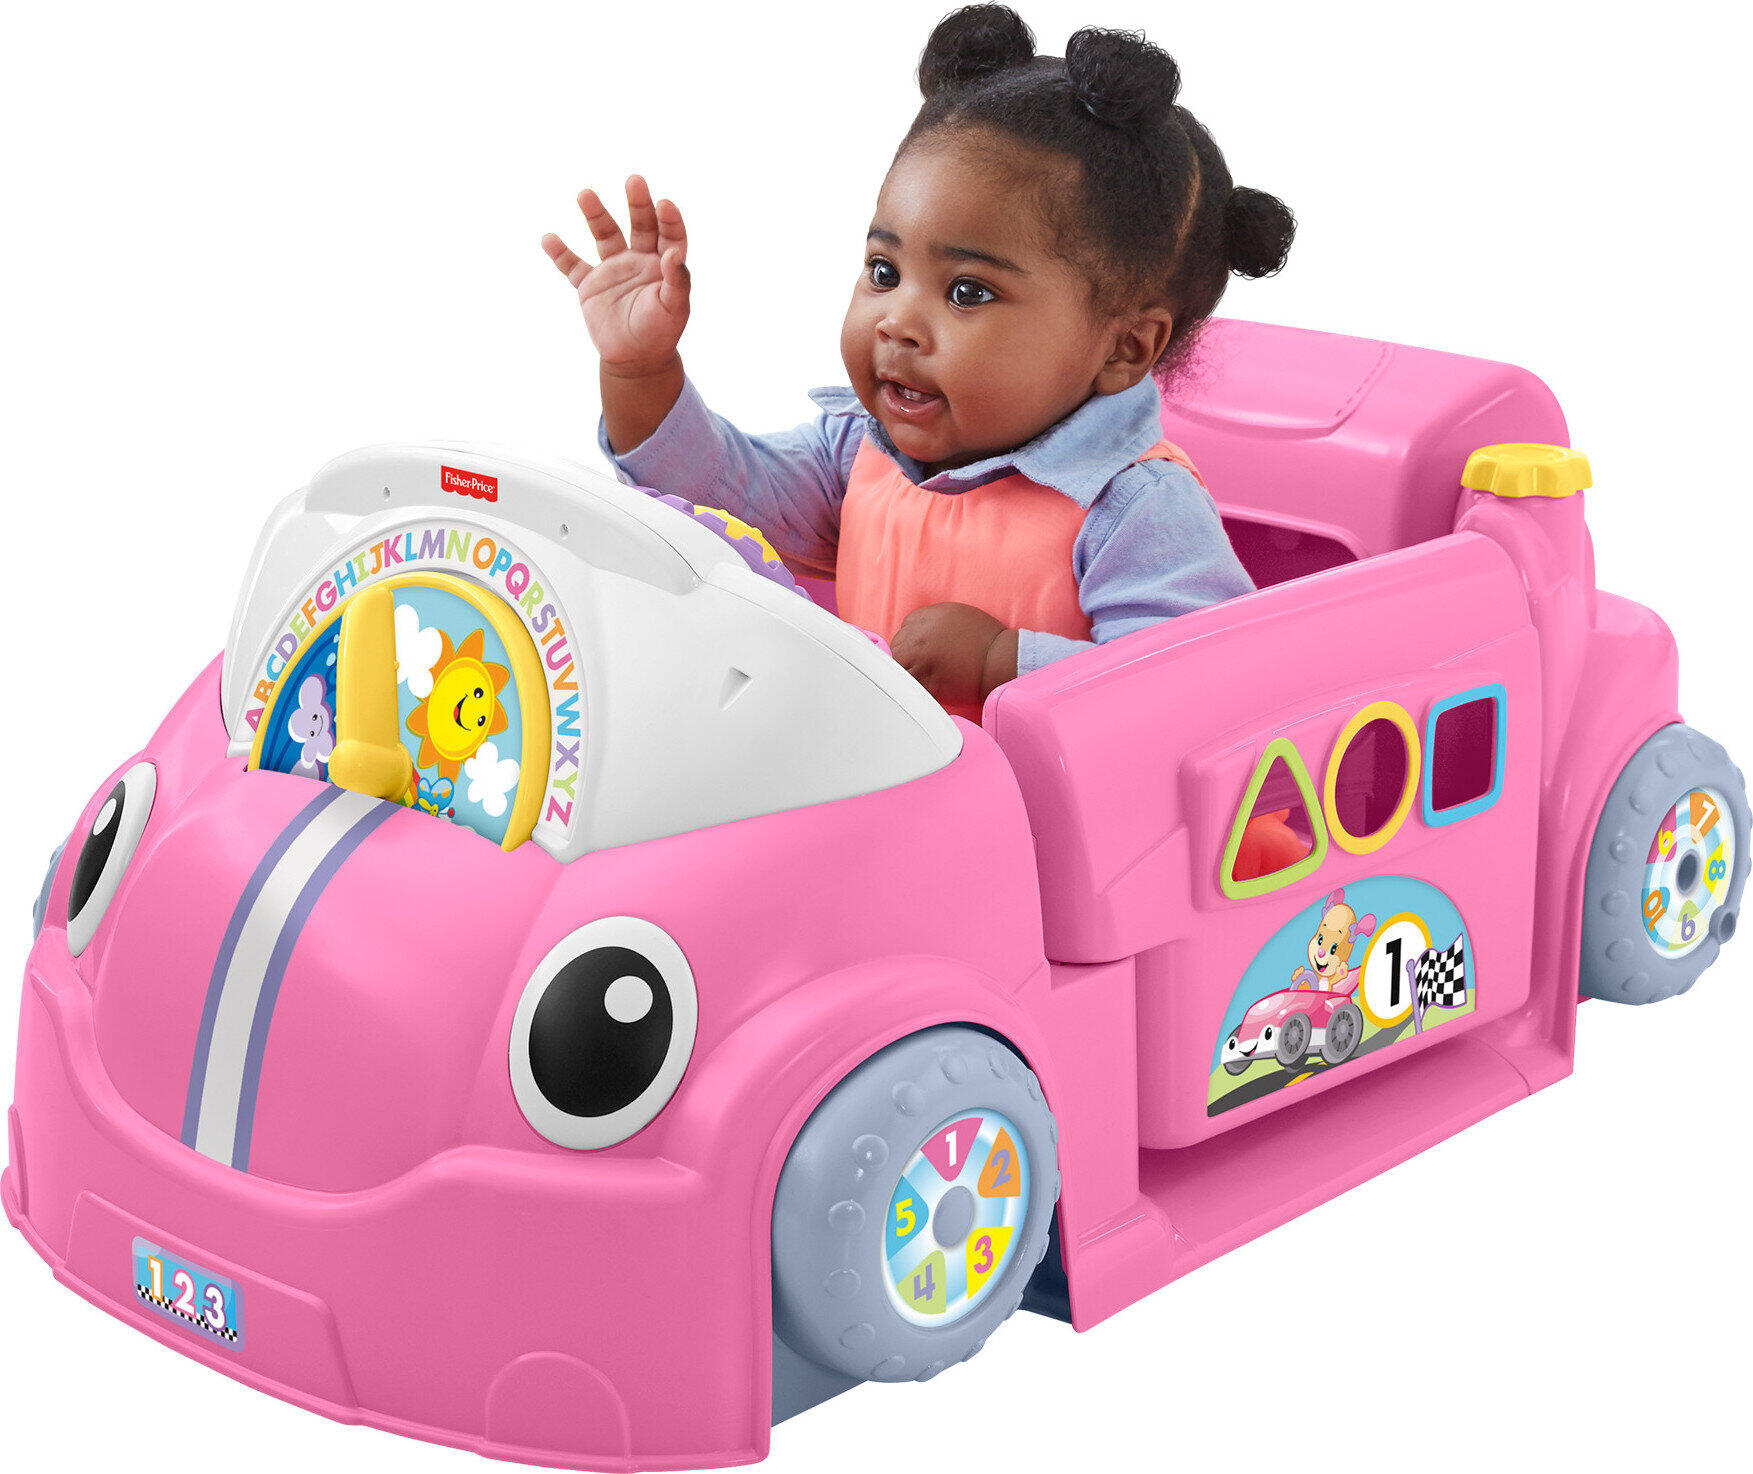 Fisher-Price Laugh & Learn Crawl Around Car, Electronic Learning Toy Activity Center for Baby, Pink - image 1 of 7